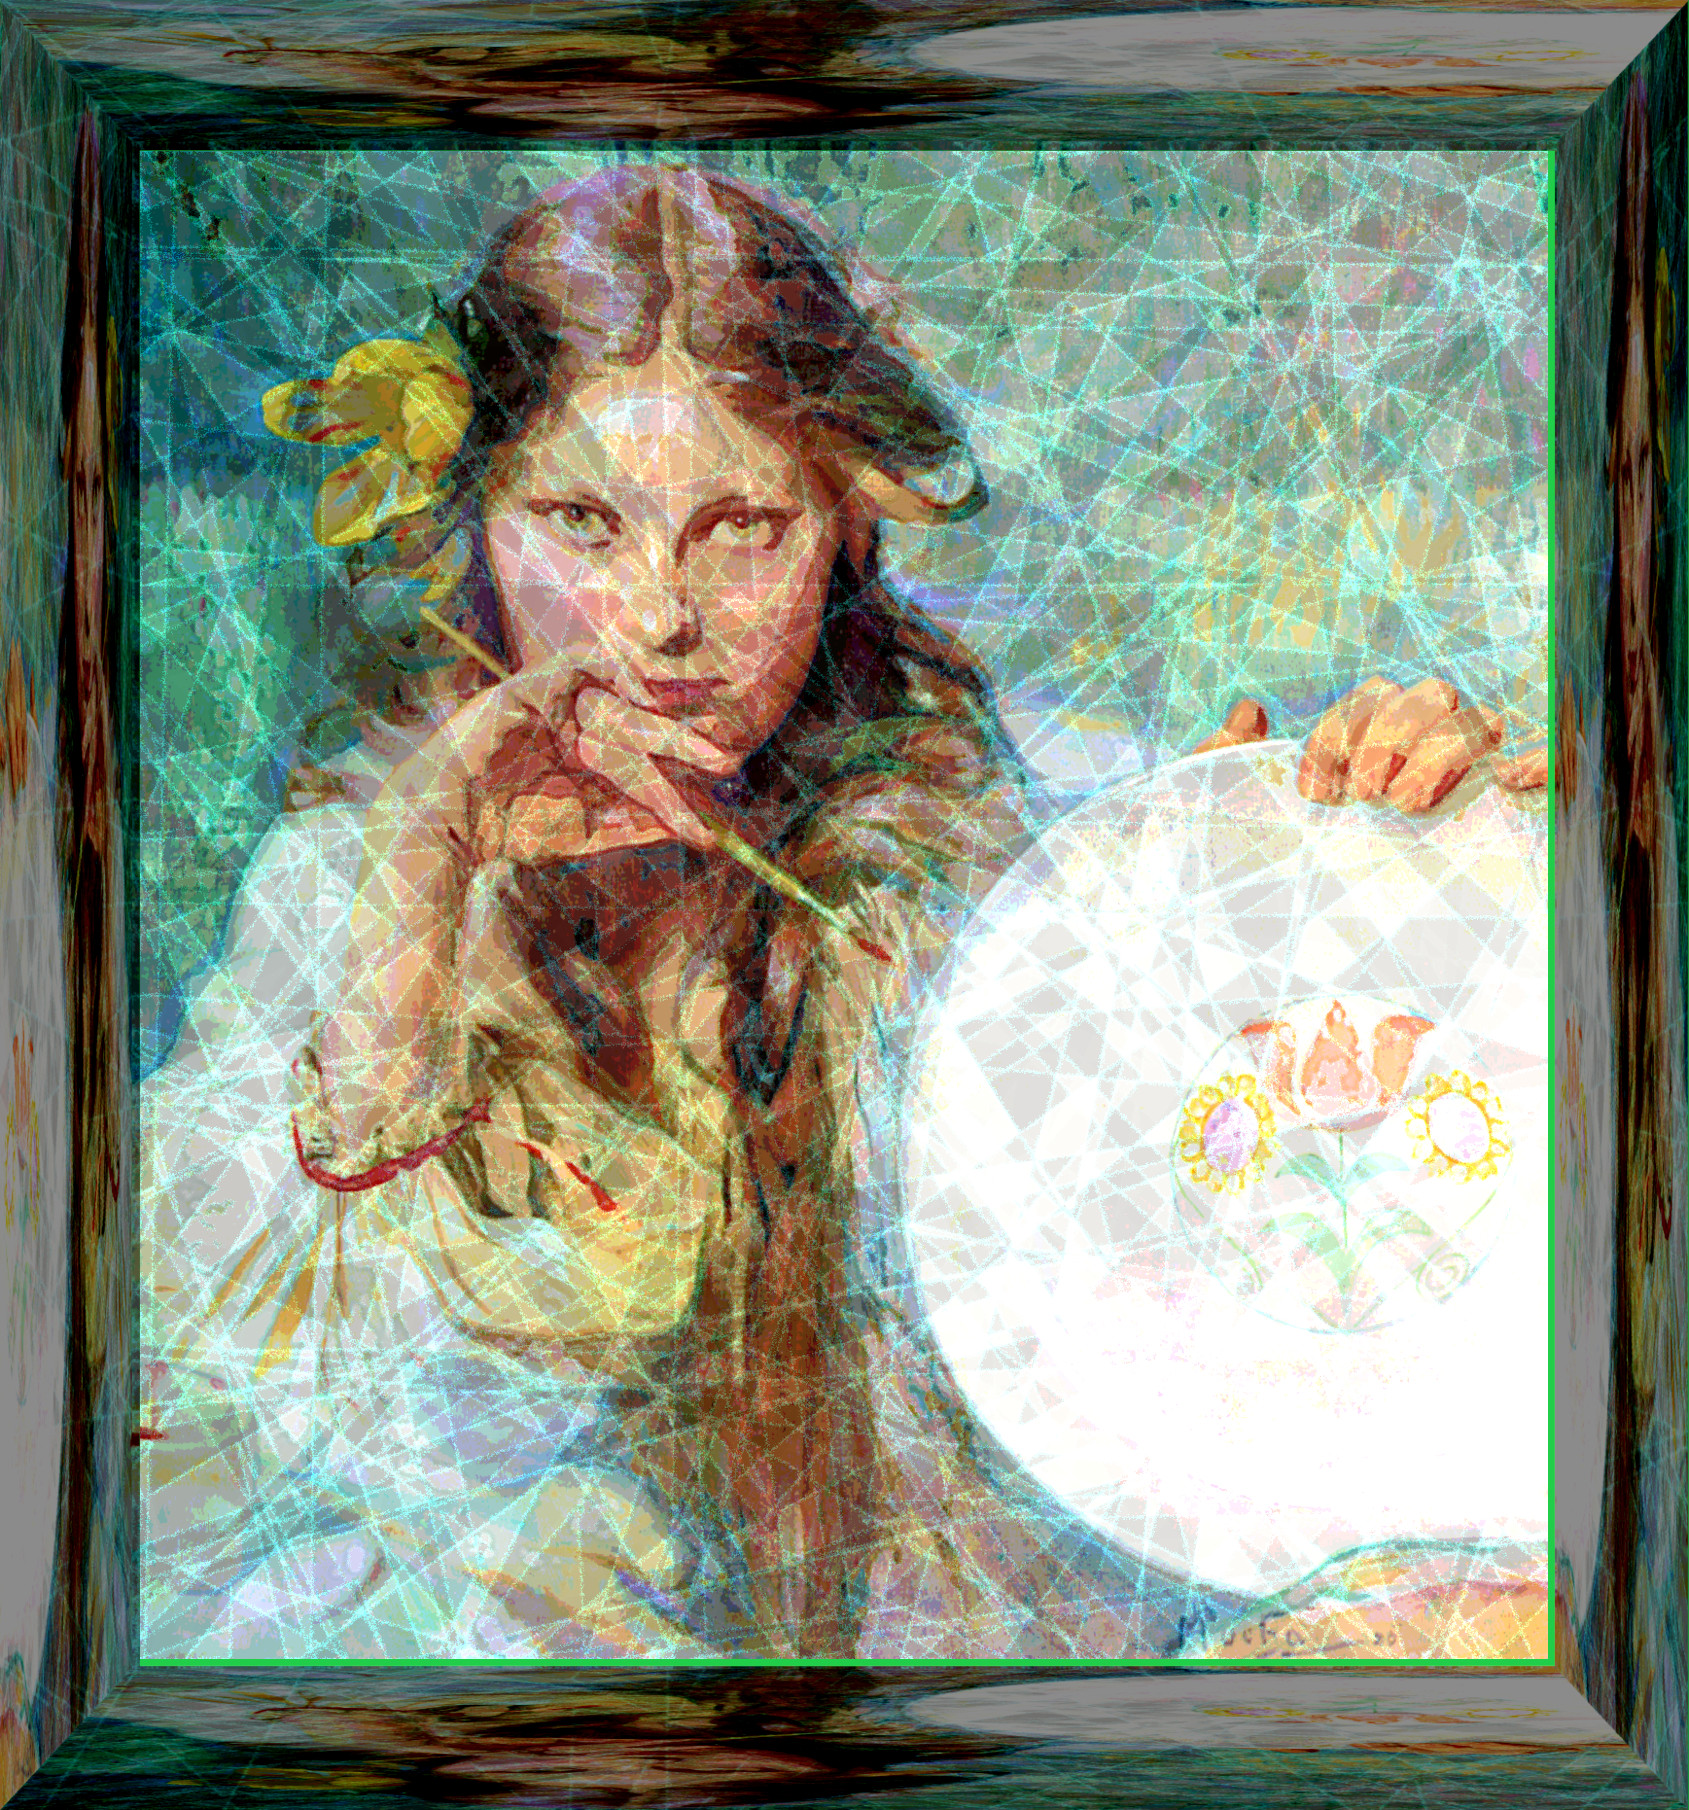 2020-11-04 16-47-50 Mucha_Alphonse_The_Artist_1920_Oil_On_Canvas_On_Board_scaled stroked with crystal background using hue 180 (framed)_FRAME-darkened .jpeg